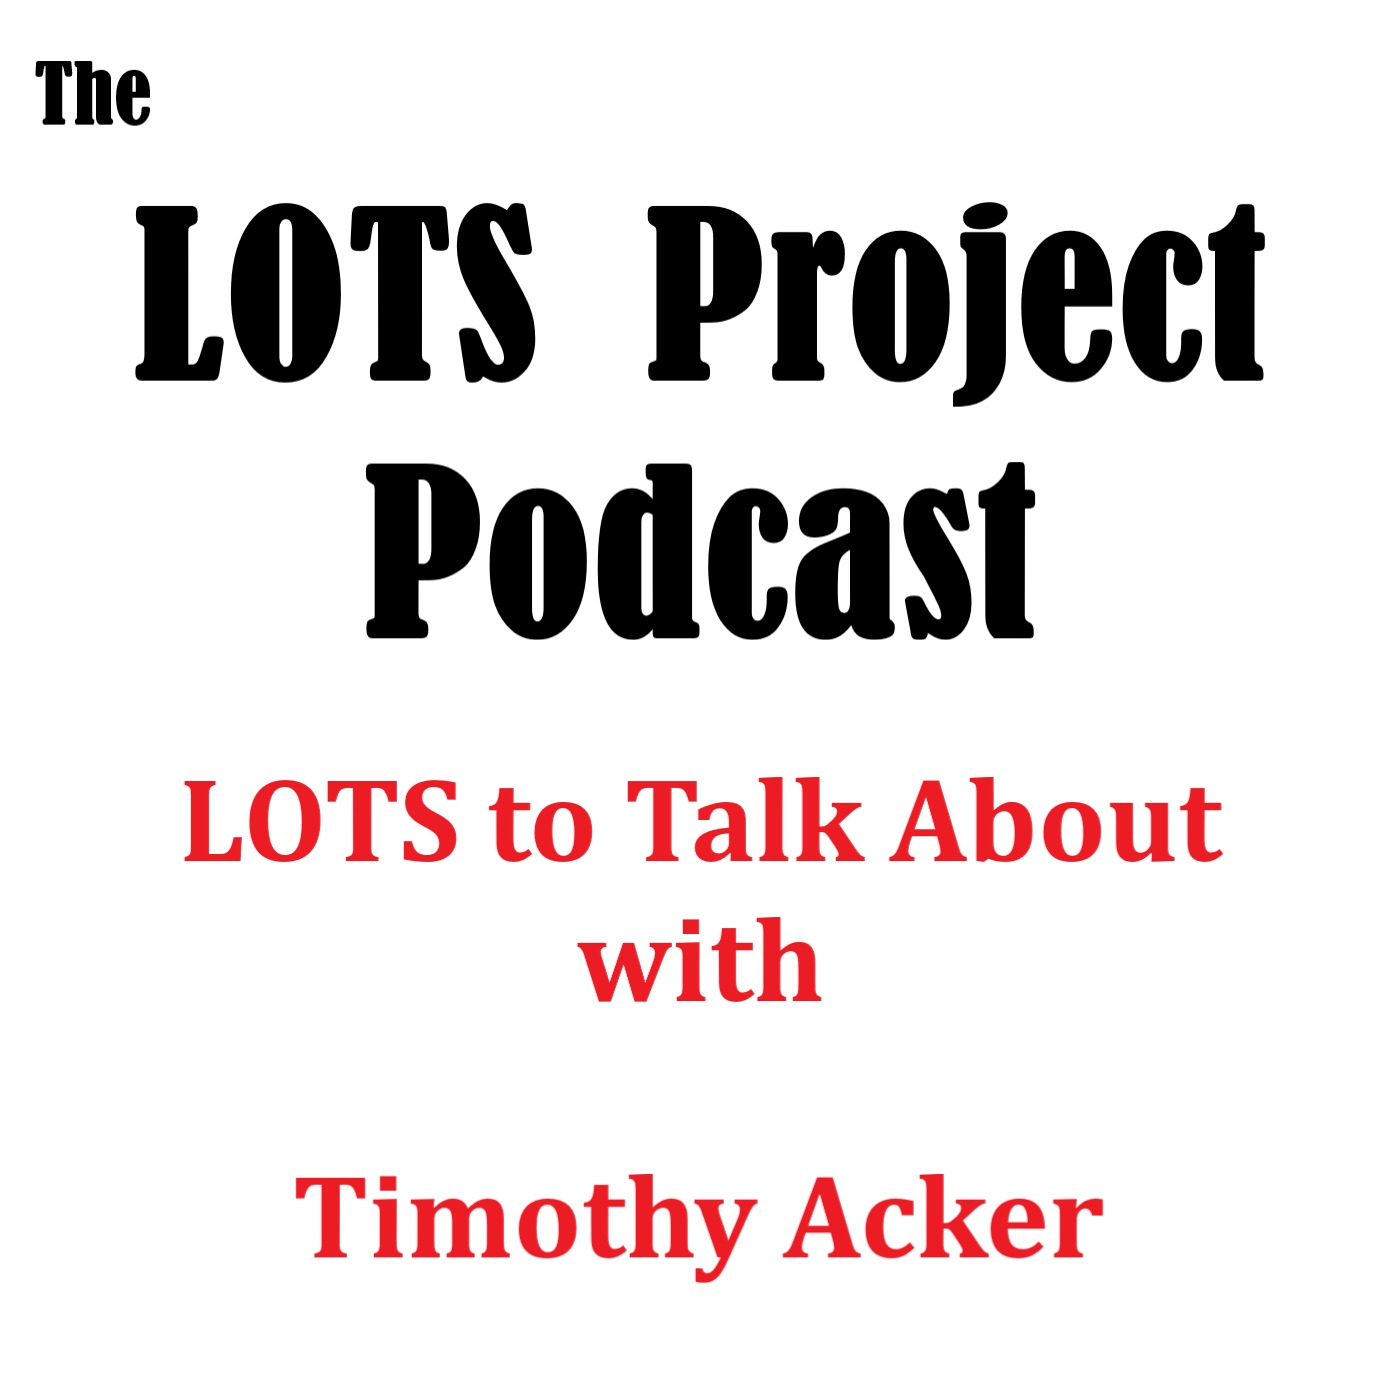 LOTS to Talk About with Timothy Acker #interview #podcast #live #pirates #scoundrels #saints